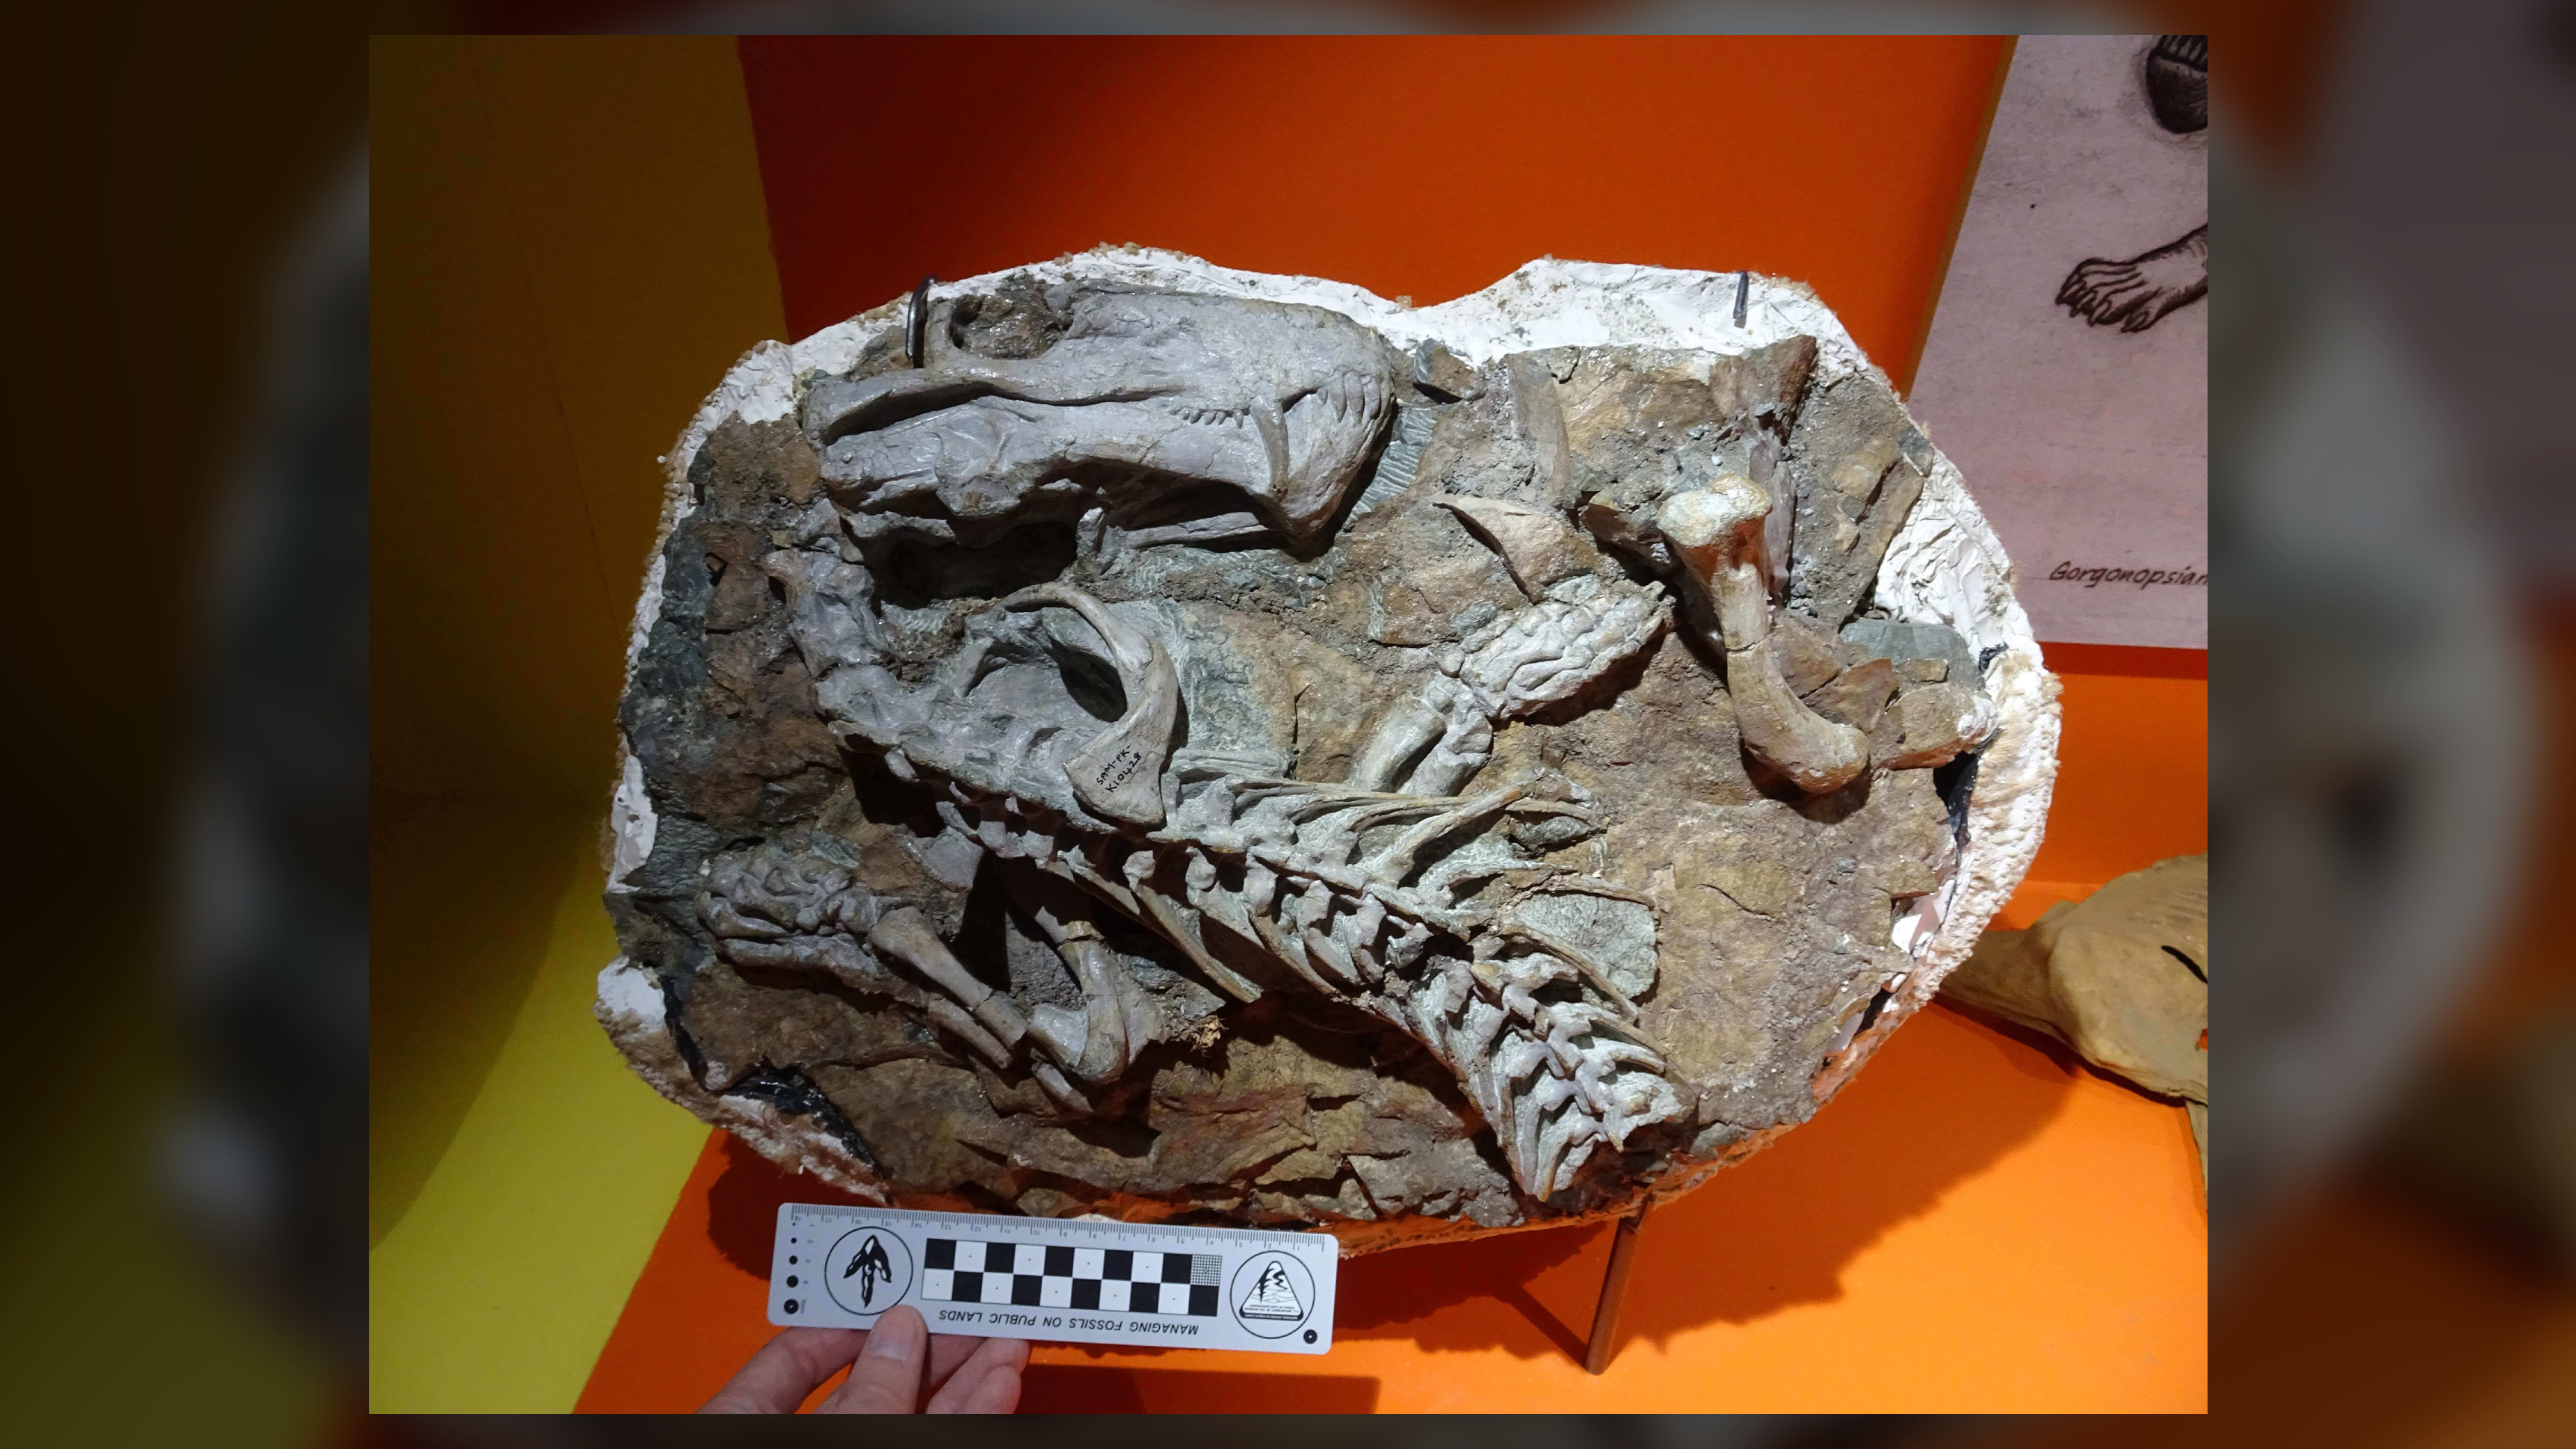 The fossil remains of a Cyonosaurus Gorgonopsian at the Iziko South African Museum in Cape Town, South Africa